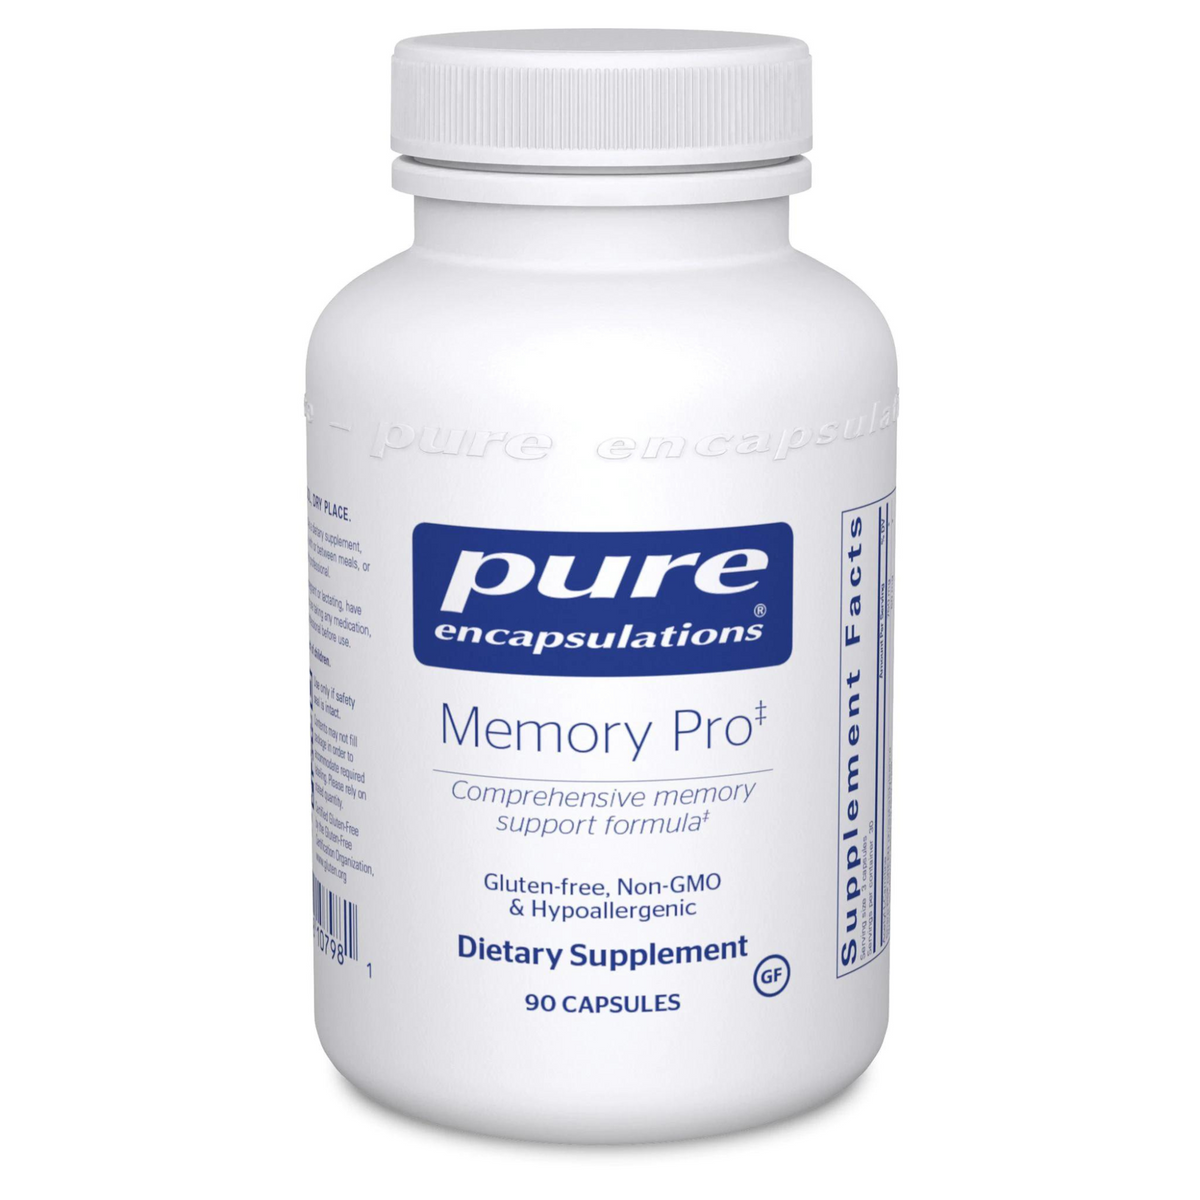 Primary Image of Memory Pro Capsules (90 count)